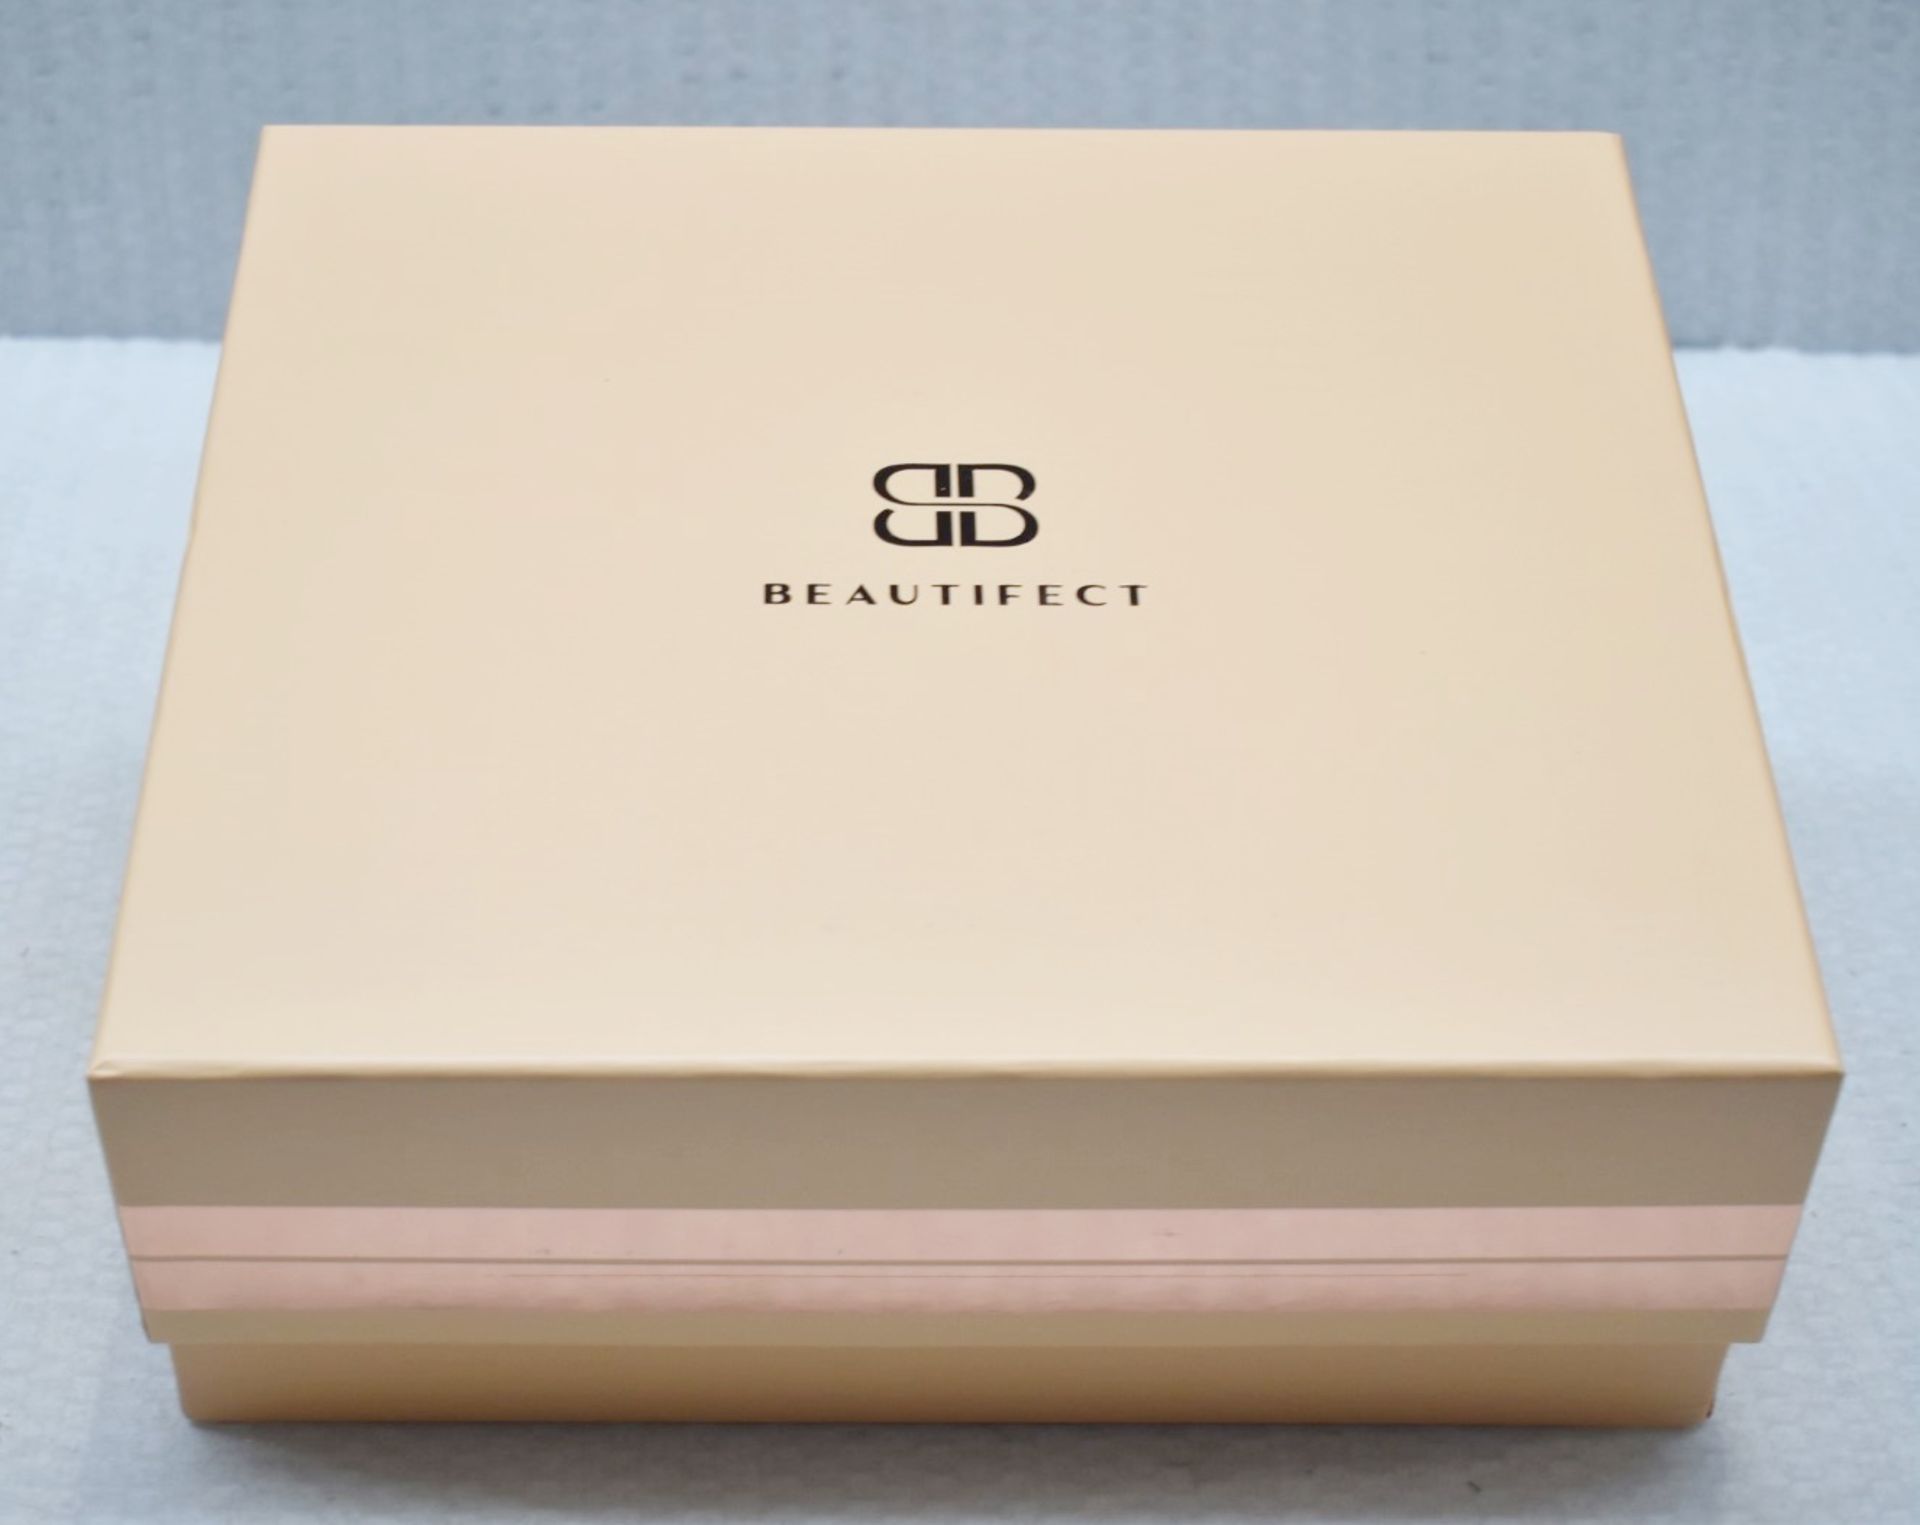 1 x BEAUTIFECT 'Beautifect Box' Make-Up Carry Case With Built-in Mirror - RRP £279.00 - Image 2 of 13